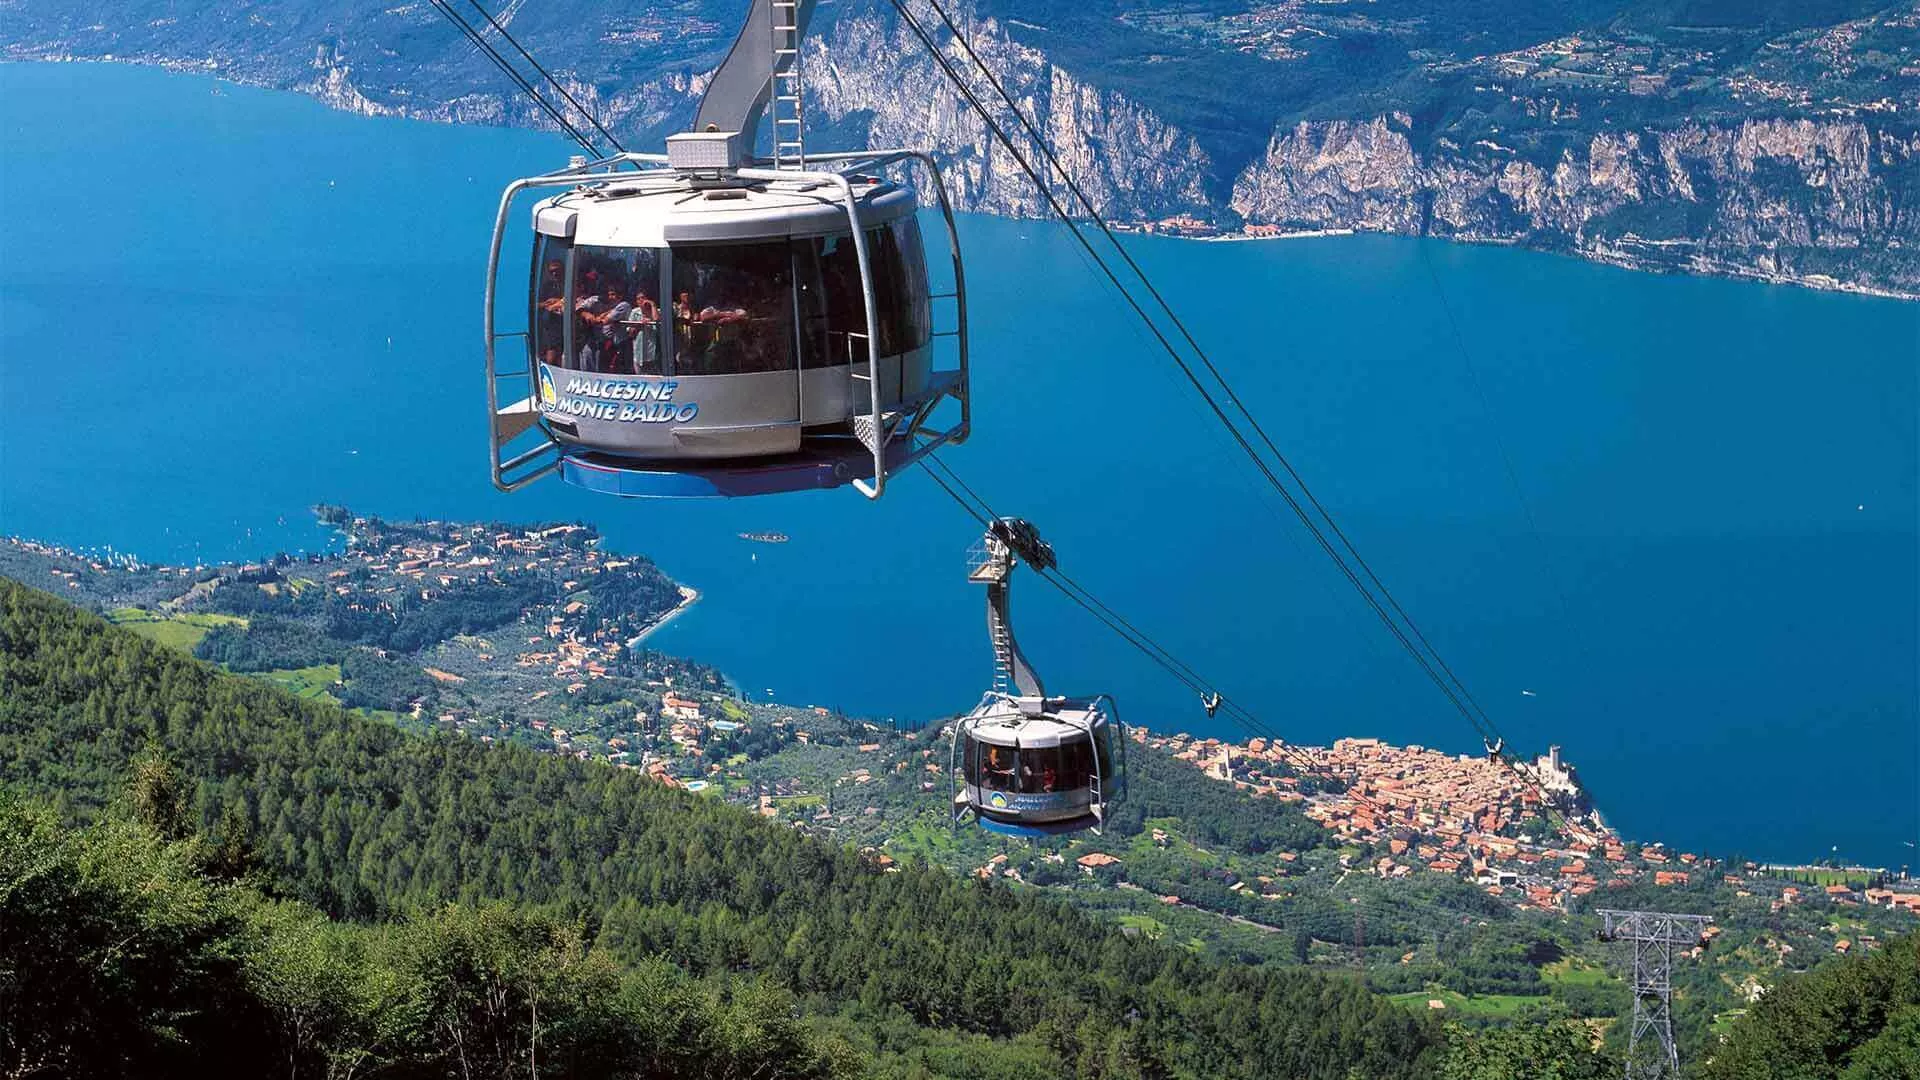 Malcesine-Monte Baldo Cableway in Italy, Europe | Cable Cars - Rated 3.3